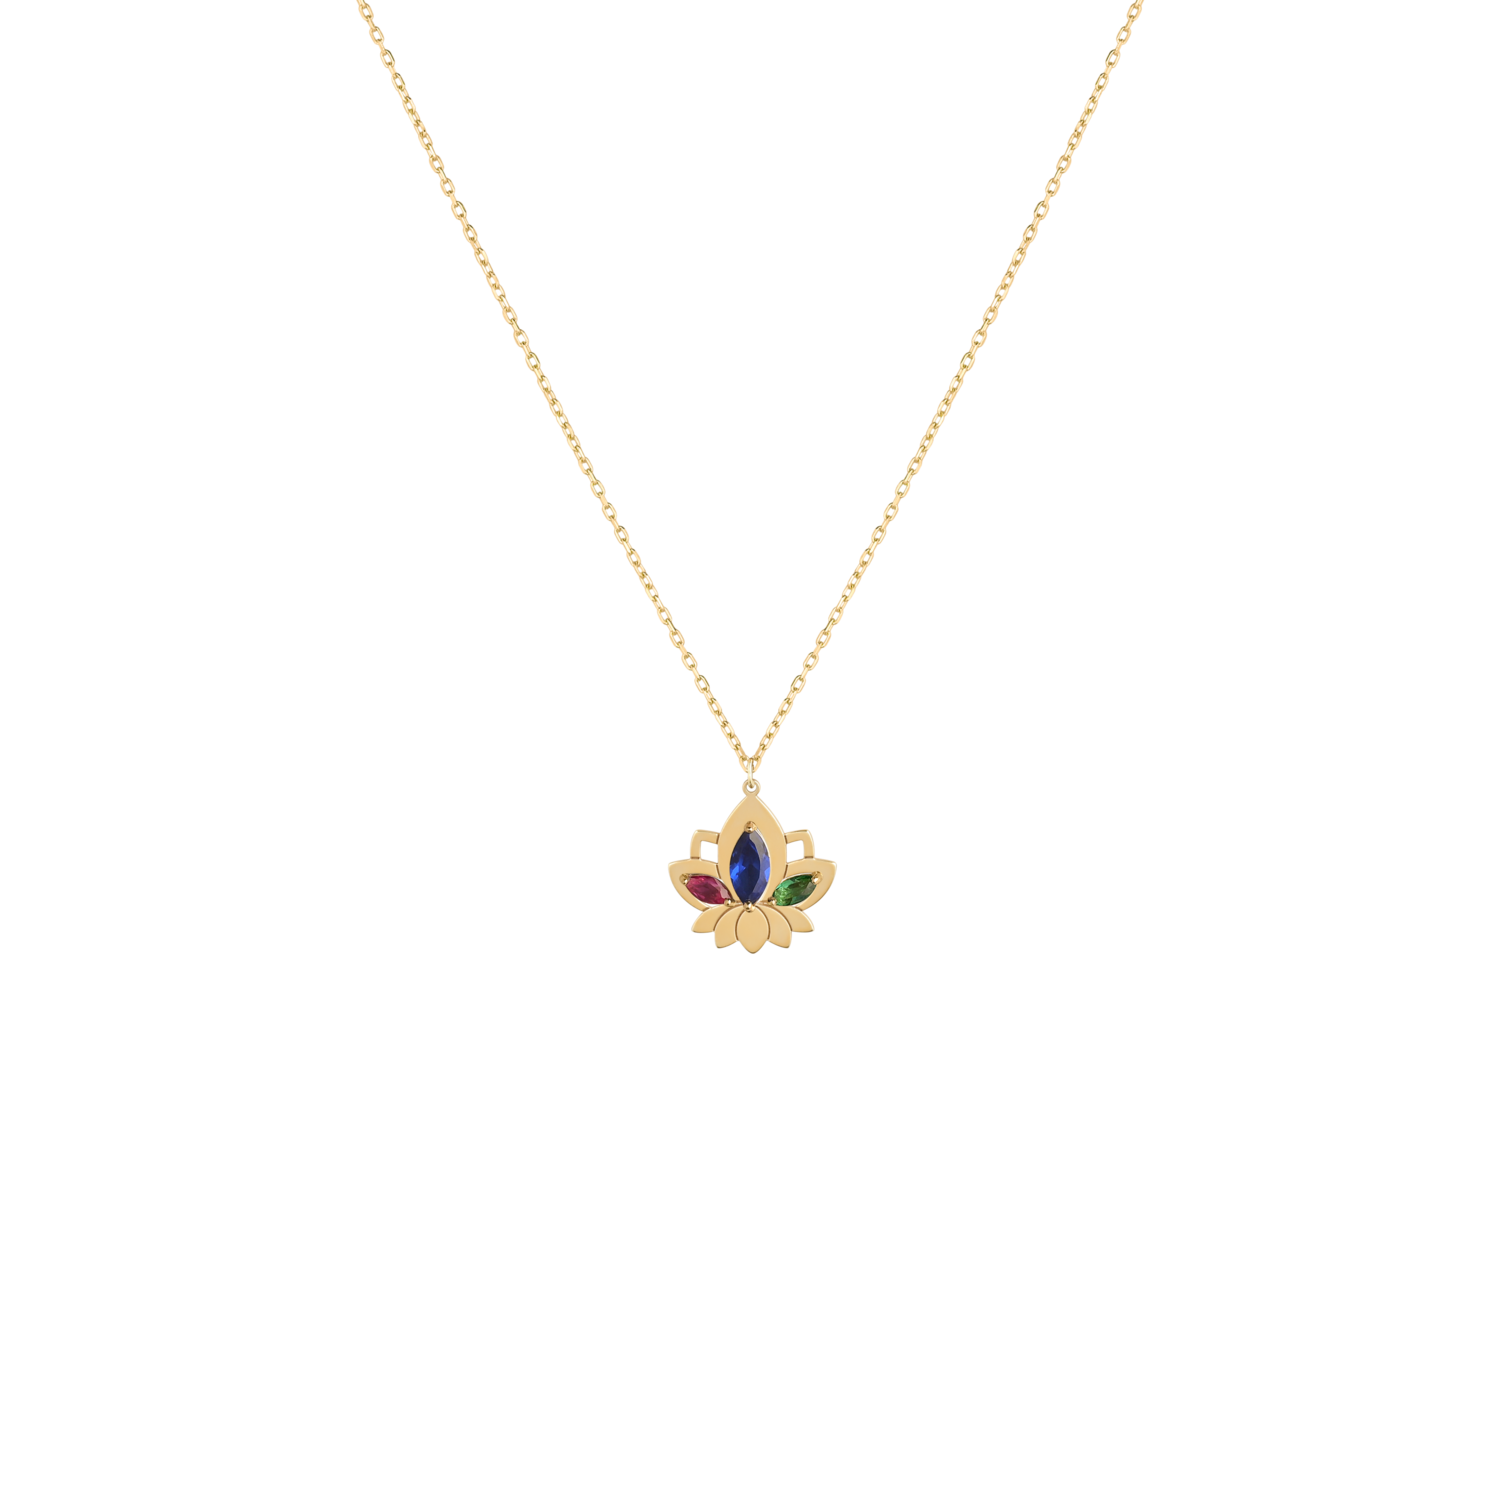 Lotus Gold Necklace with Colored Stones